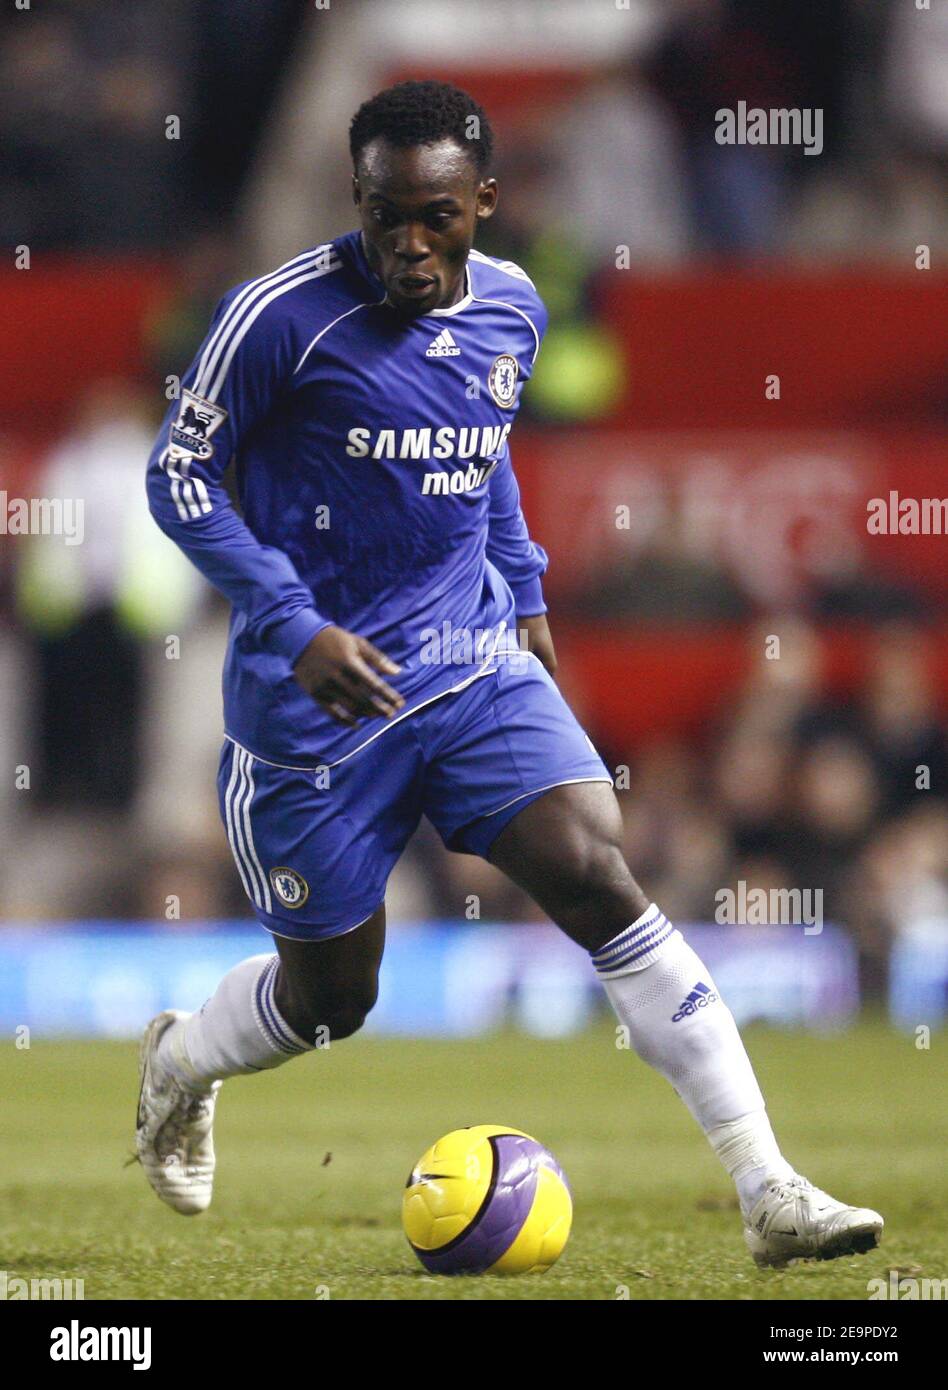 Chelsea's Michael Essien during the FA Barclays Premiership, Manchester United vs Chelsea at the Old Trafford stadium in Manchester,UK on November 26, 2006. The match ended in a 1-1 draw. Photo by Christian Liewig/ABACAPRESS.COM Stock Photo